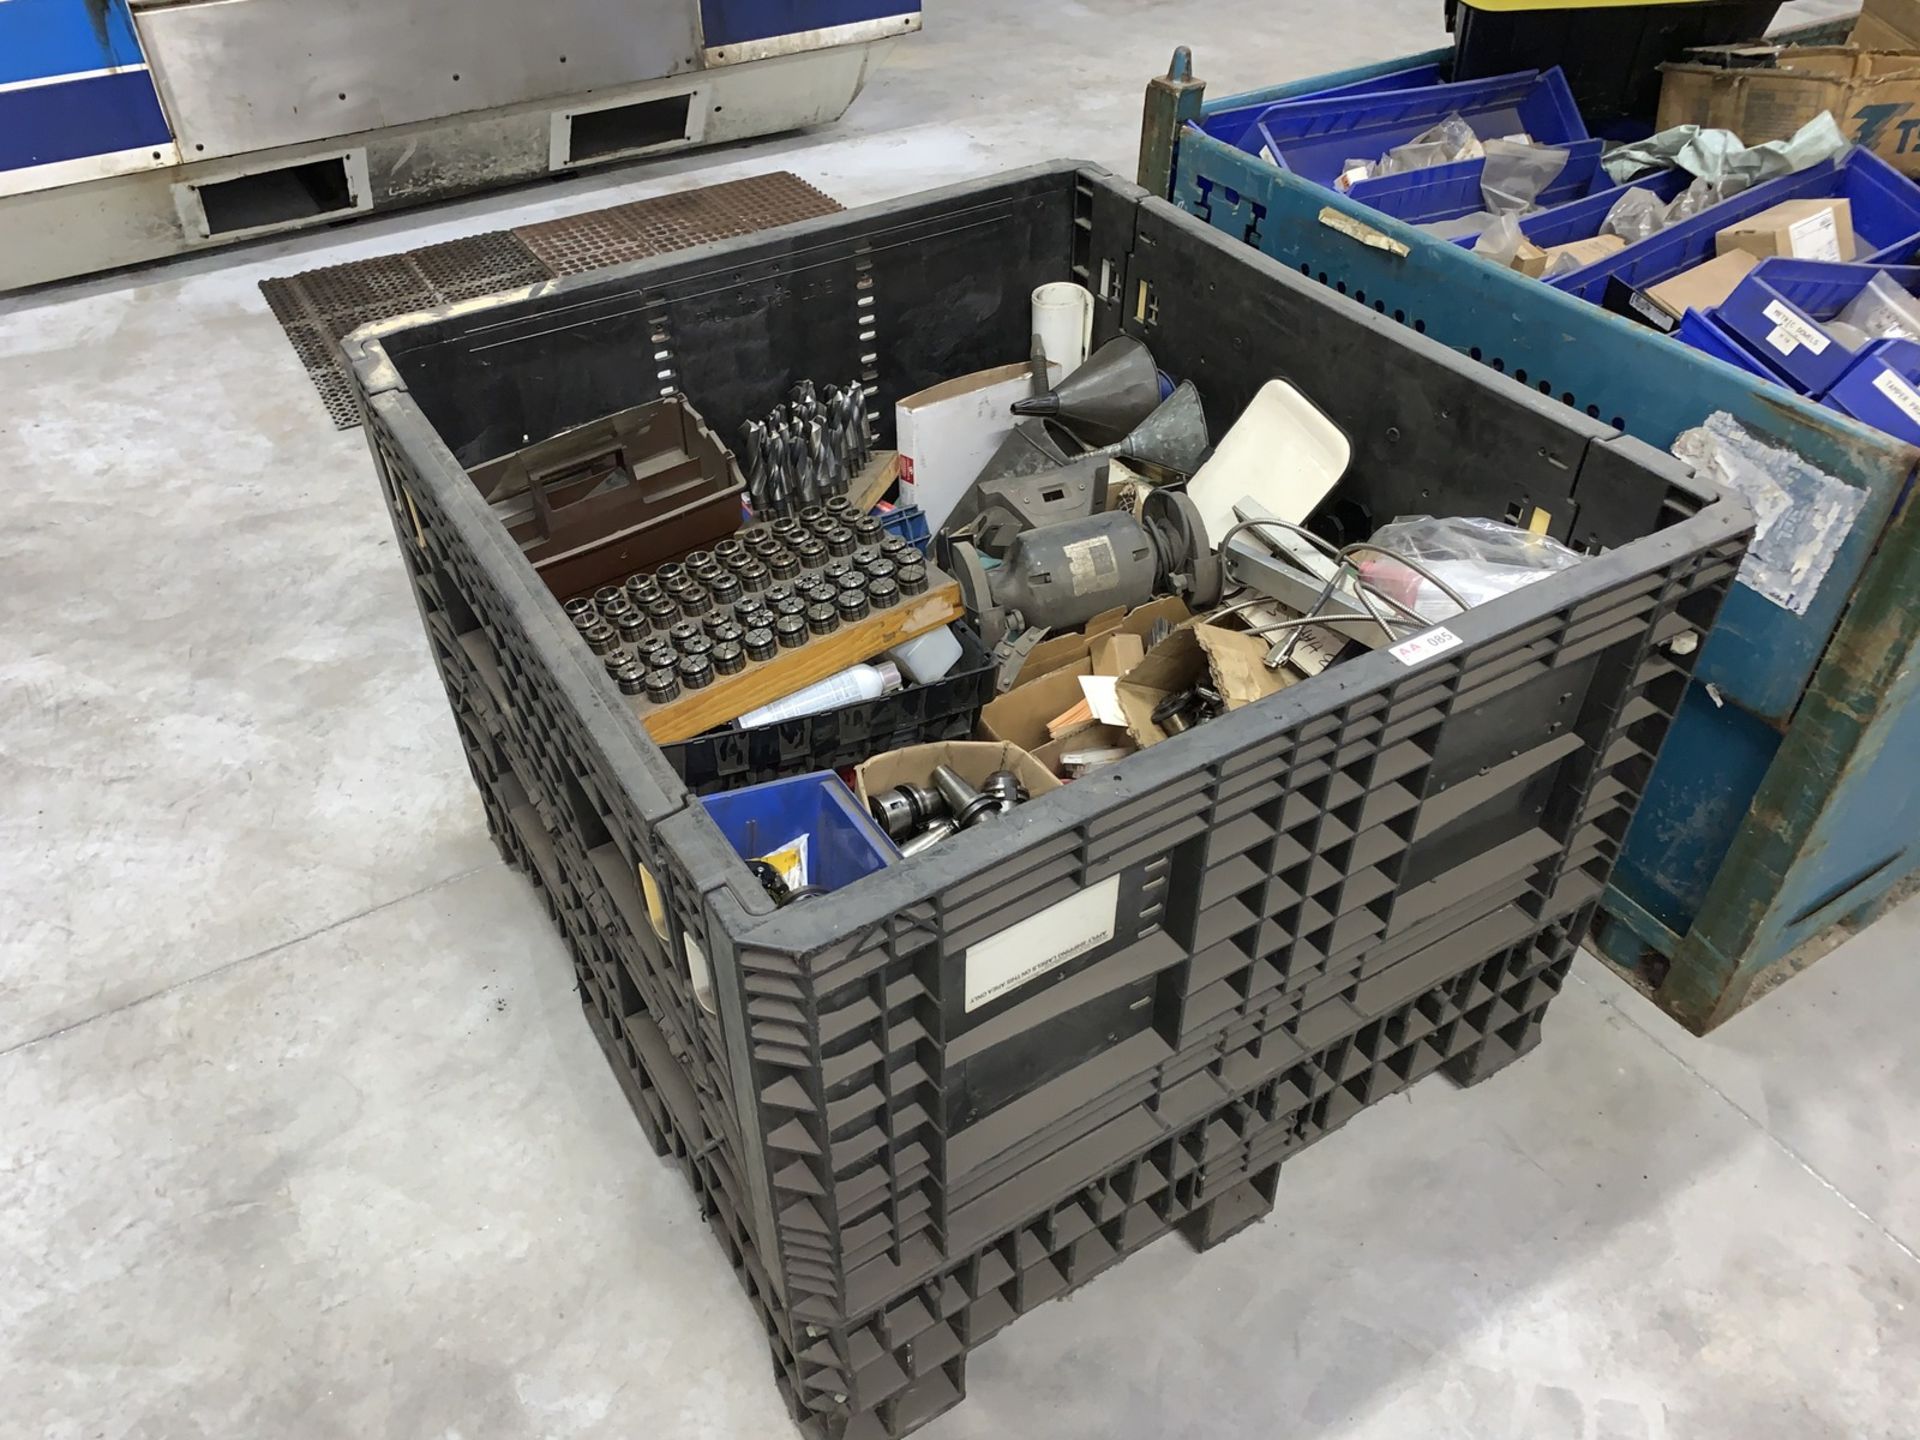 Skid full of Tooling including Tool Holders, Collets, Bits, Taps and Misc. Tooling (All Items MUST